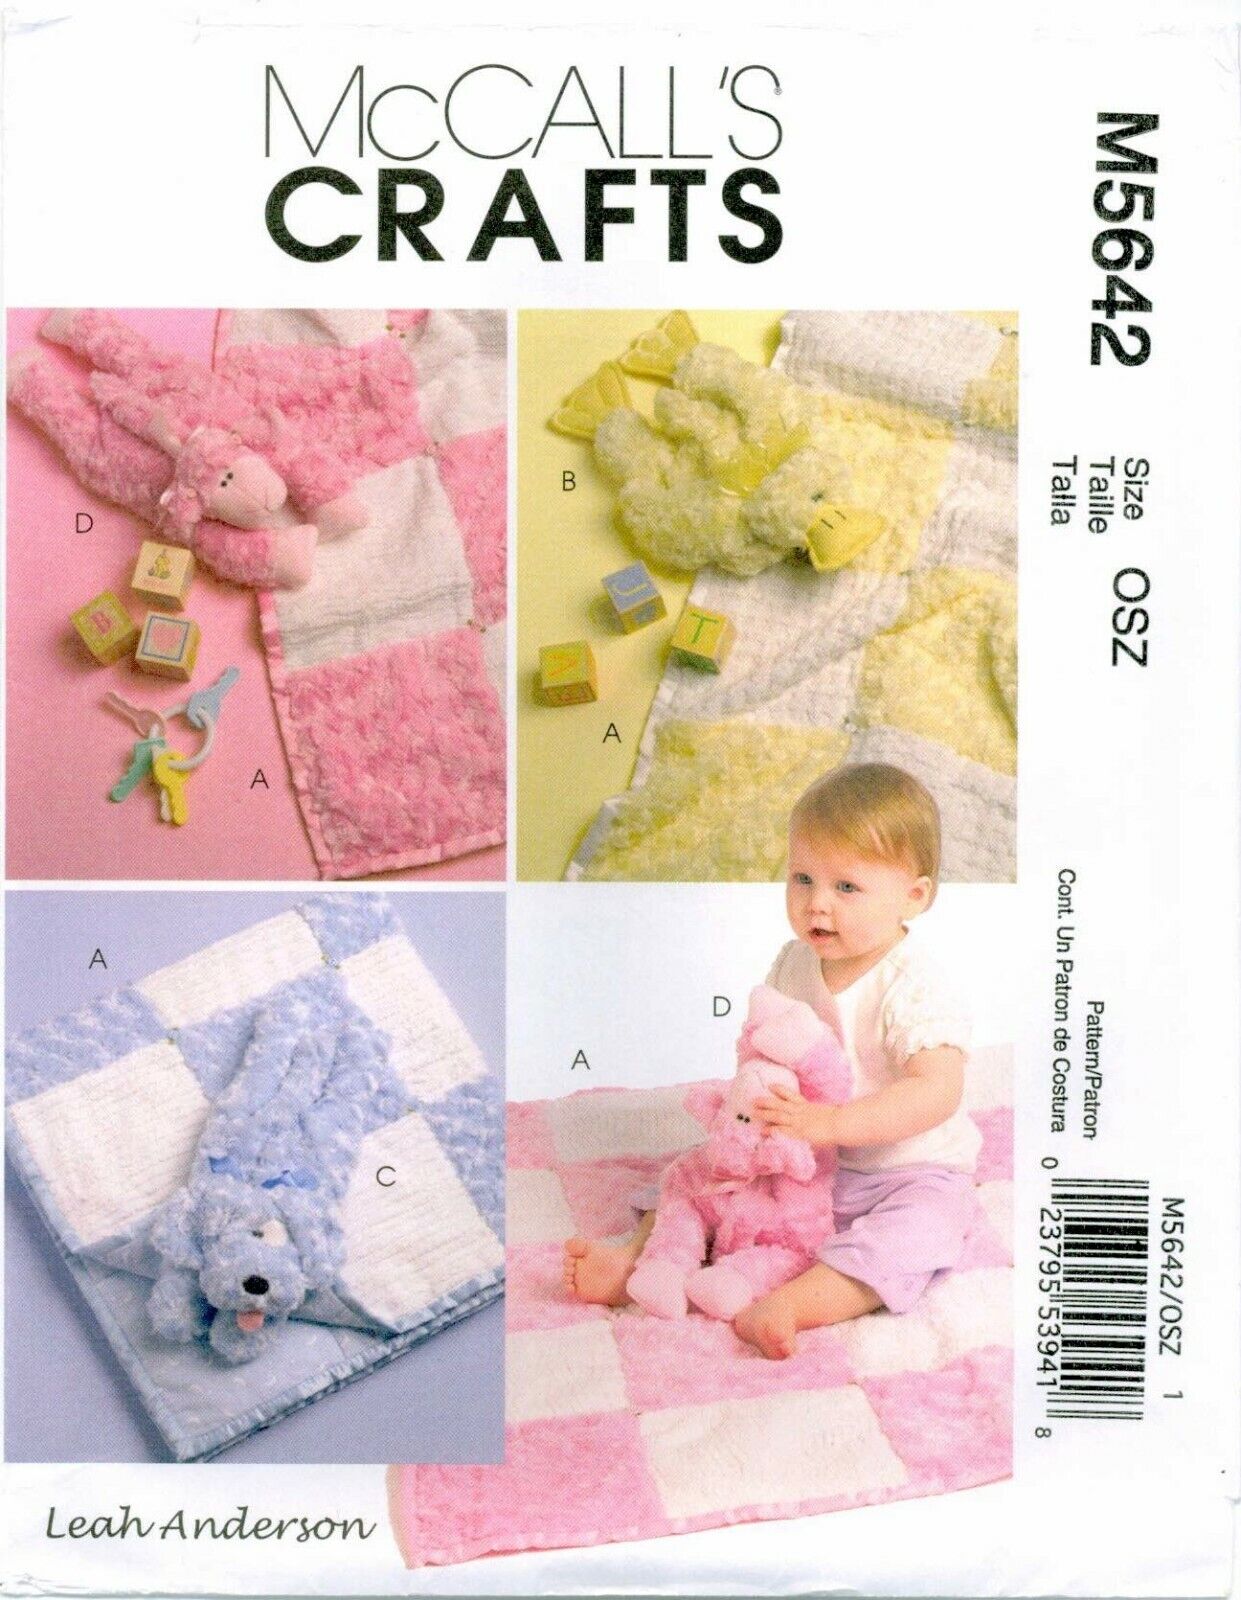 McCalls 5642 BABY GIFTS Toy Plush Blanket Quilt Anderson Crafts Pattern UNCUT